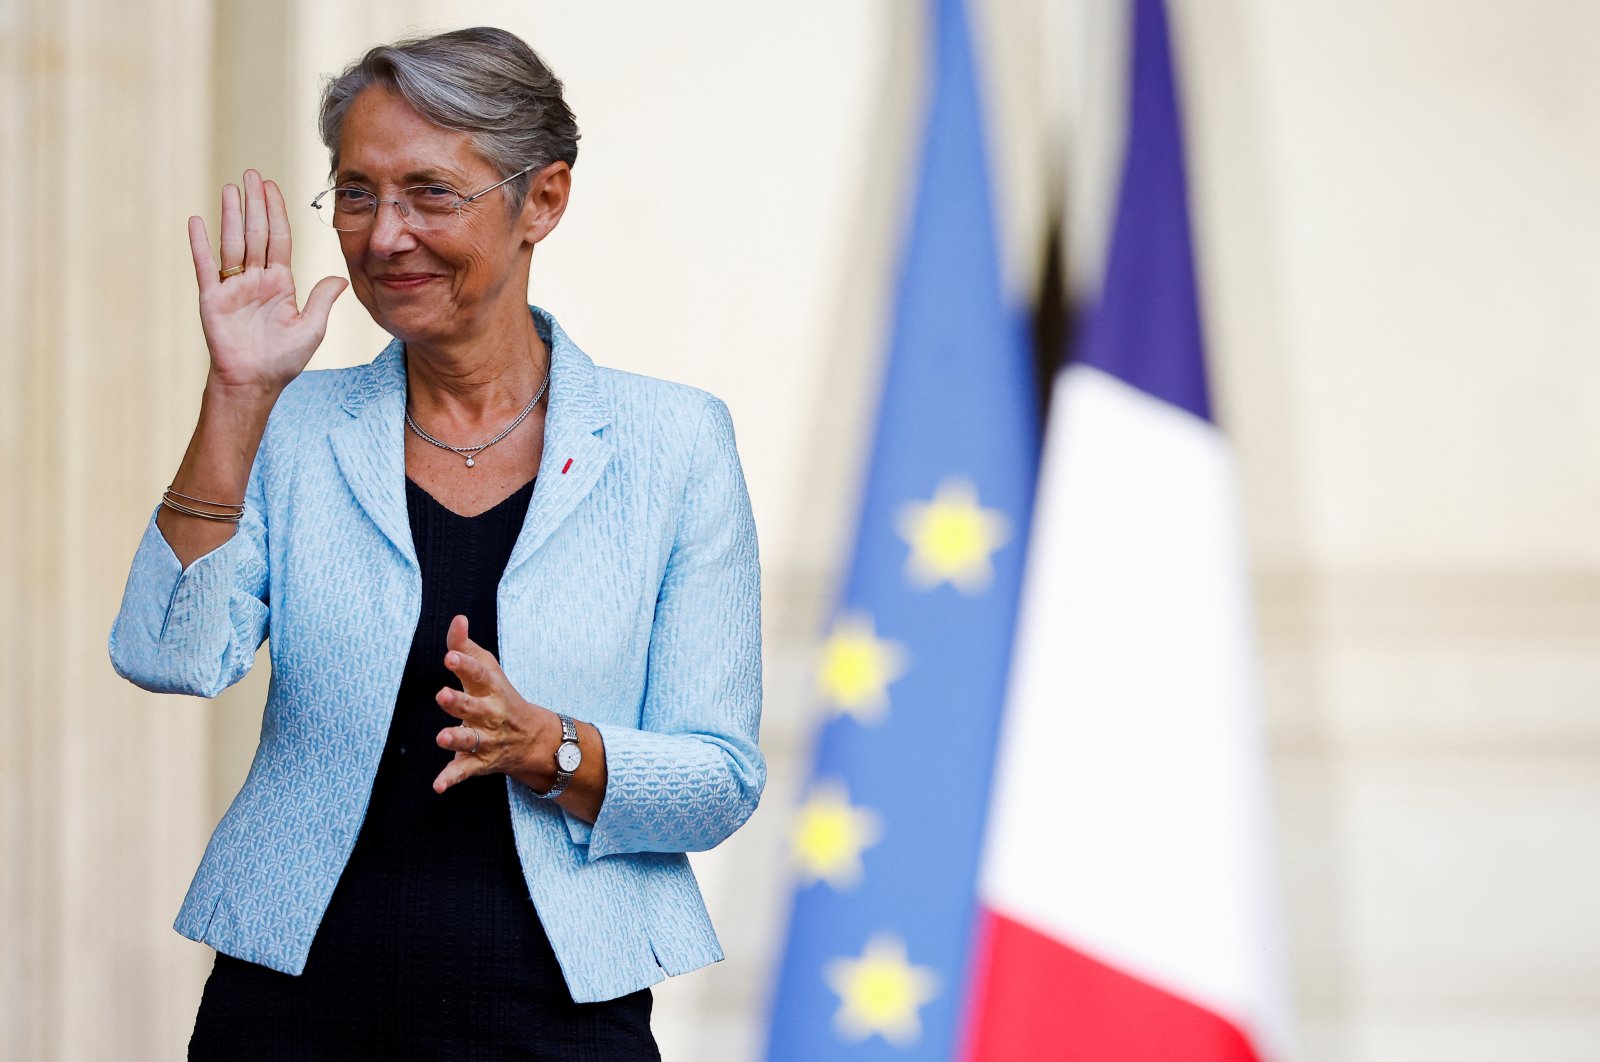 Newly appointed French Prime Minister Elisabeth Borne gestures as she attends a handover ceremony in the courtyard of Hotel Matignon in Paris, France, May 16, 2022. (Reuters Photo)